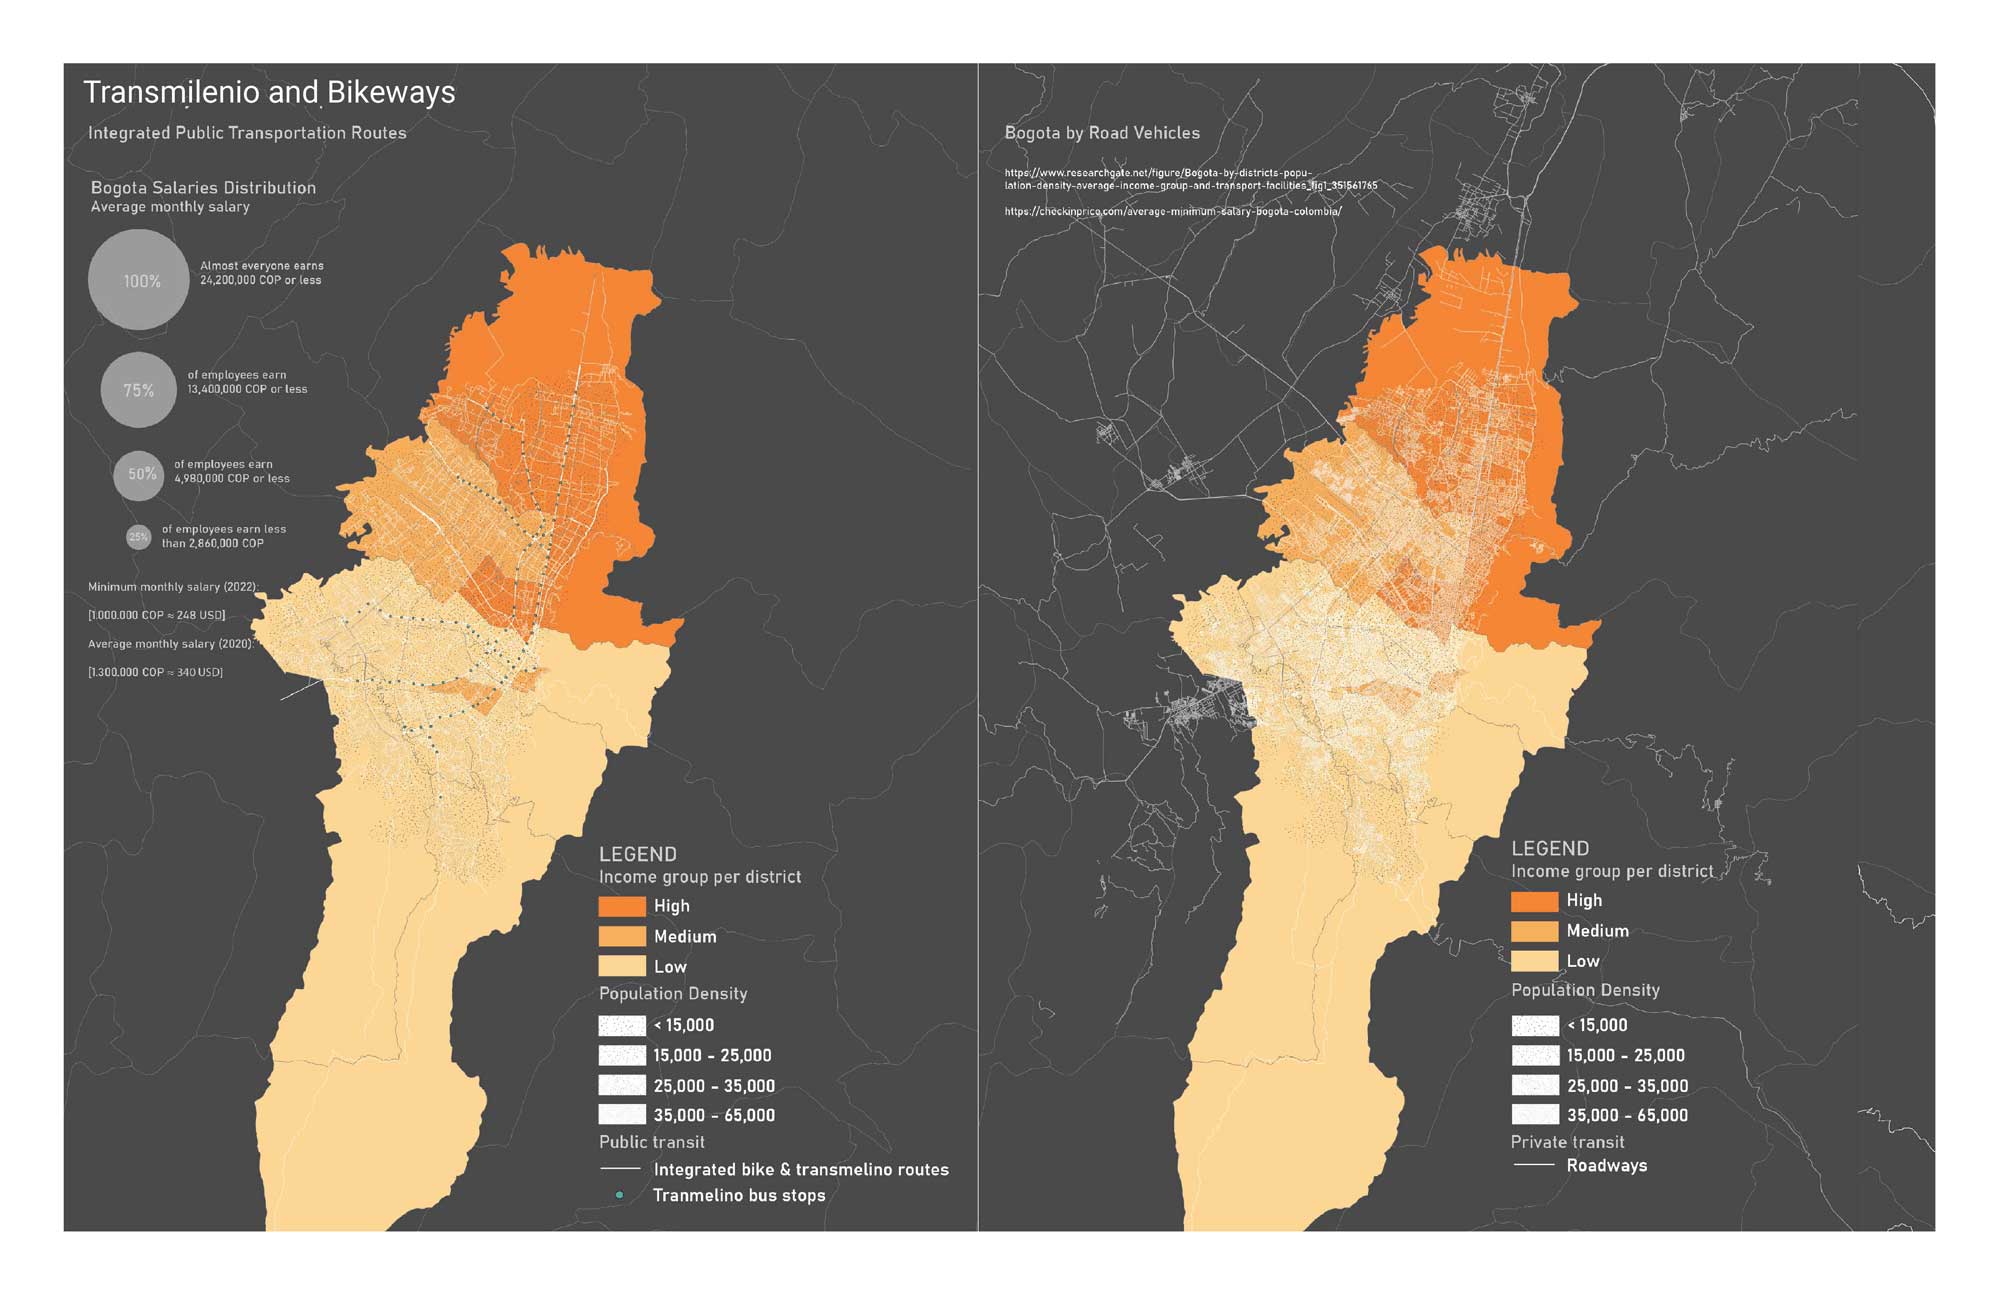 An annotated map of Bogota, Colombia showing city demographics by income as well as the density of road vehicles.